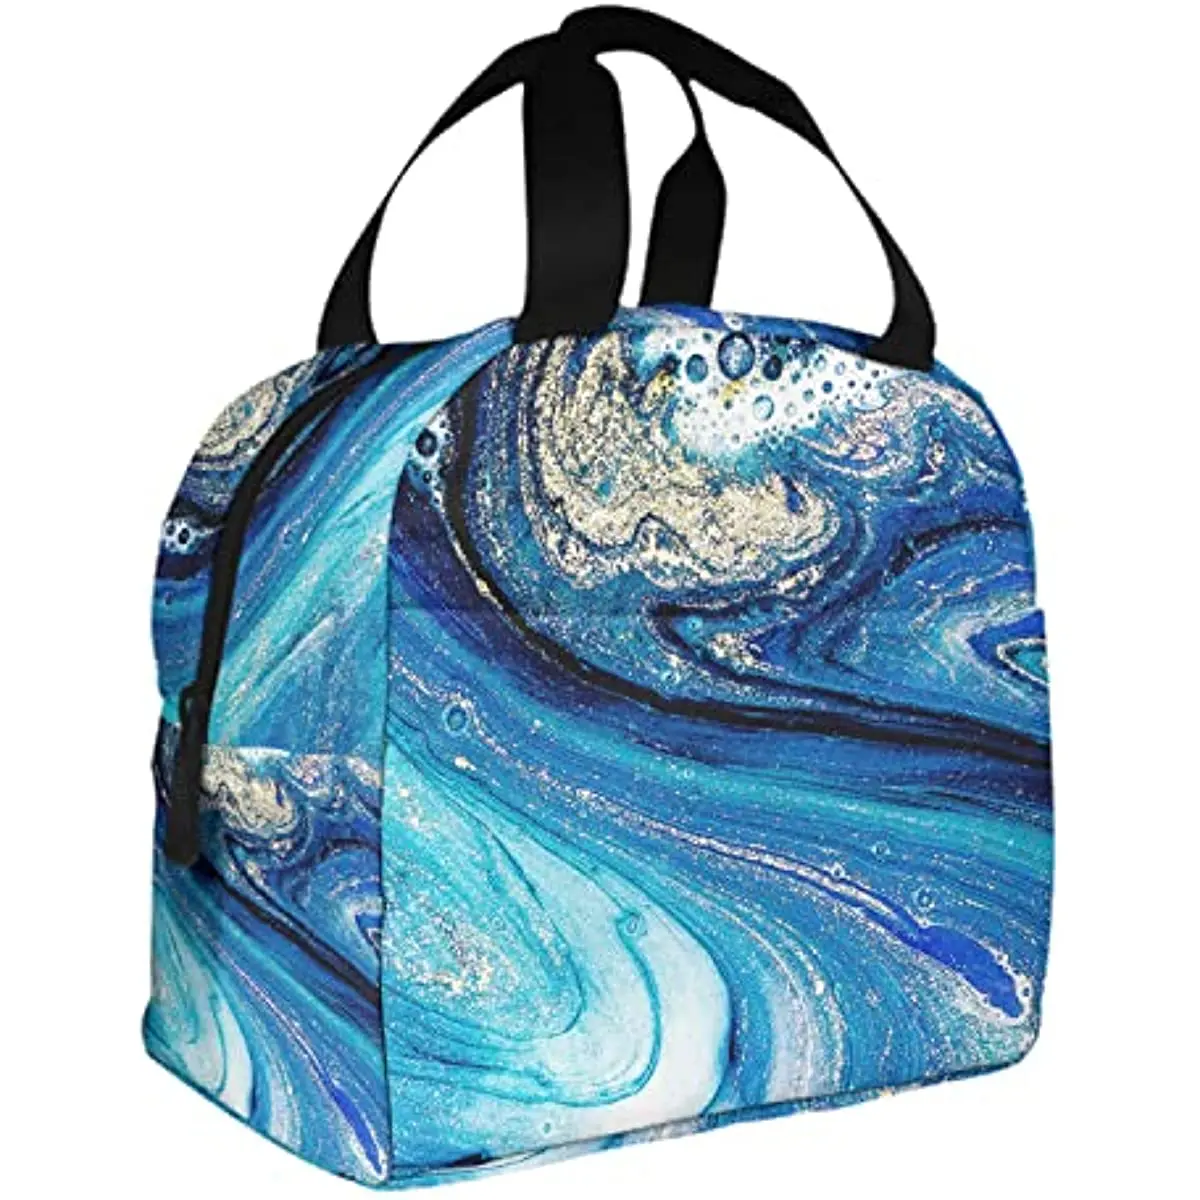 

Abstract Ocean Kids Lunch Bag Swirls of Marble The Ripples of Agate Blue Paint Insulated Lunch Bag Cooler Tote for Work School